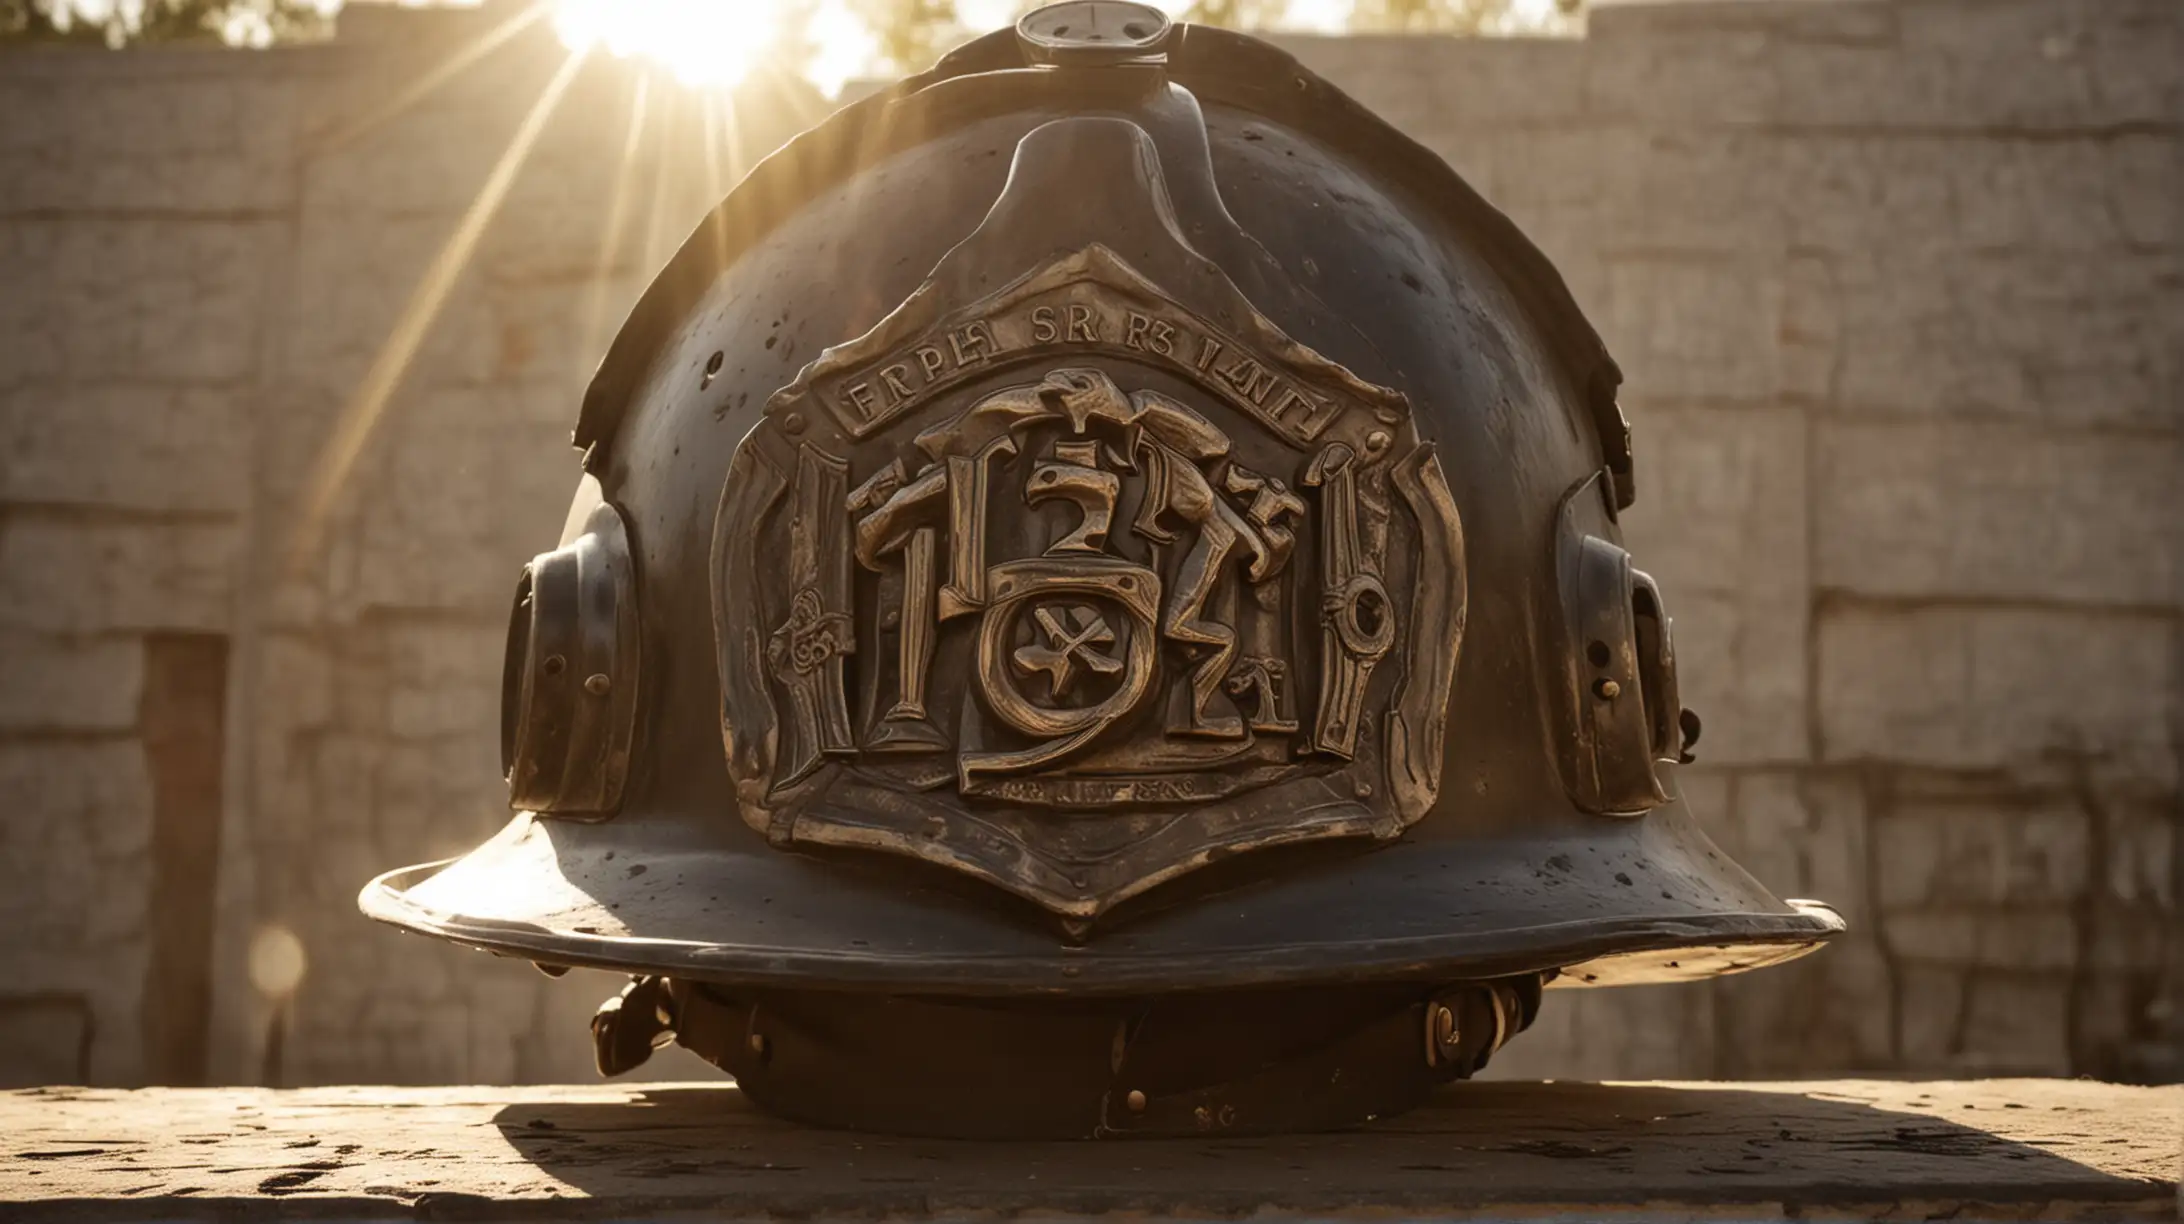 The fireman's helmet gleams in the sunlight, a symbol of courage and heroism in the face of danger.


